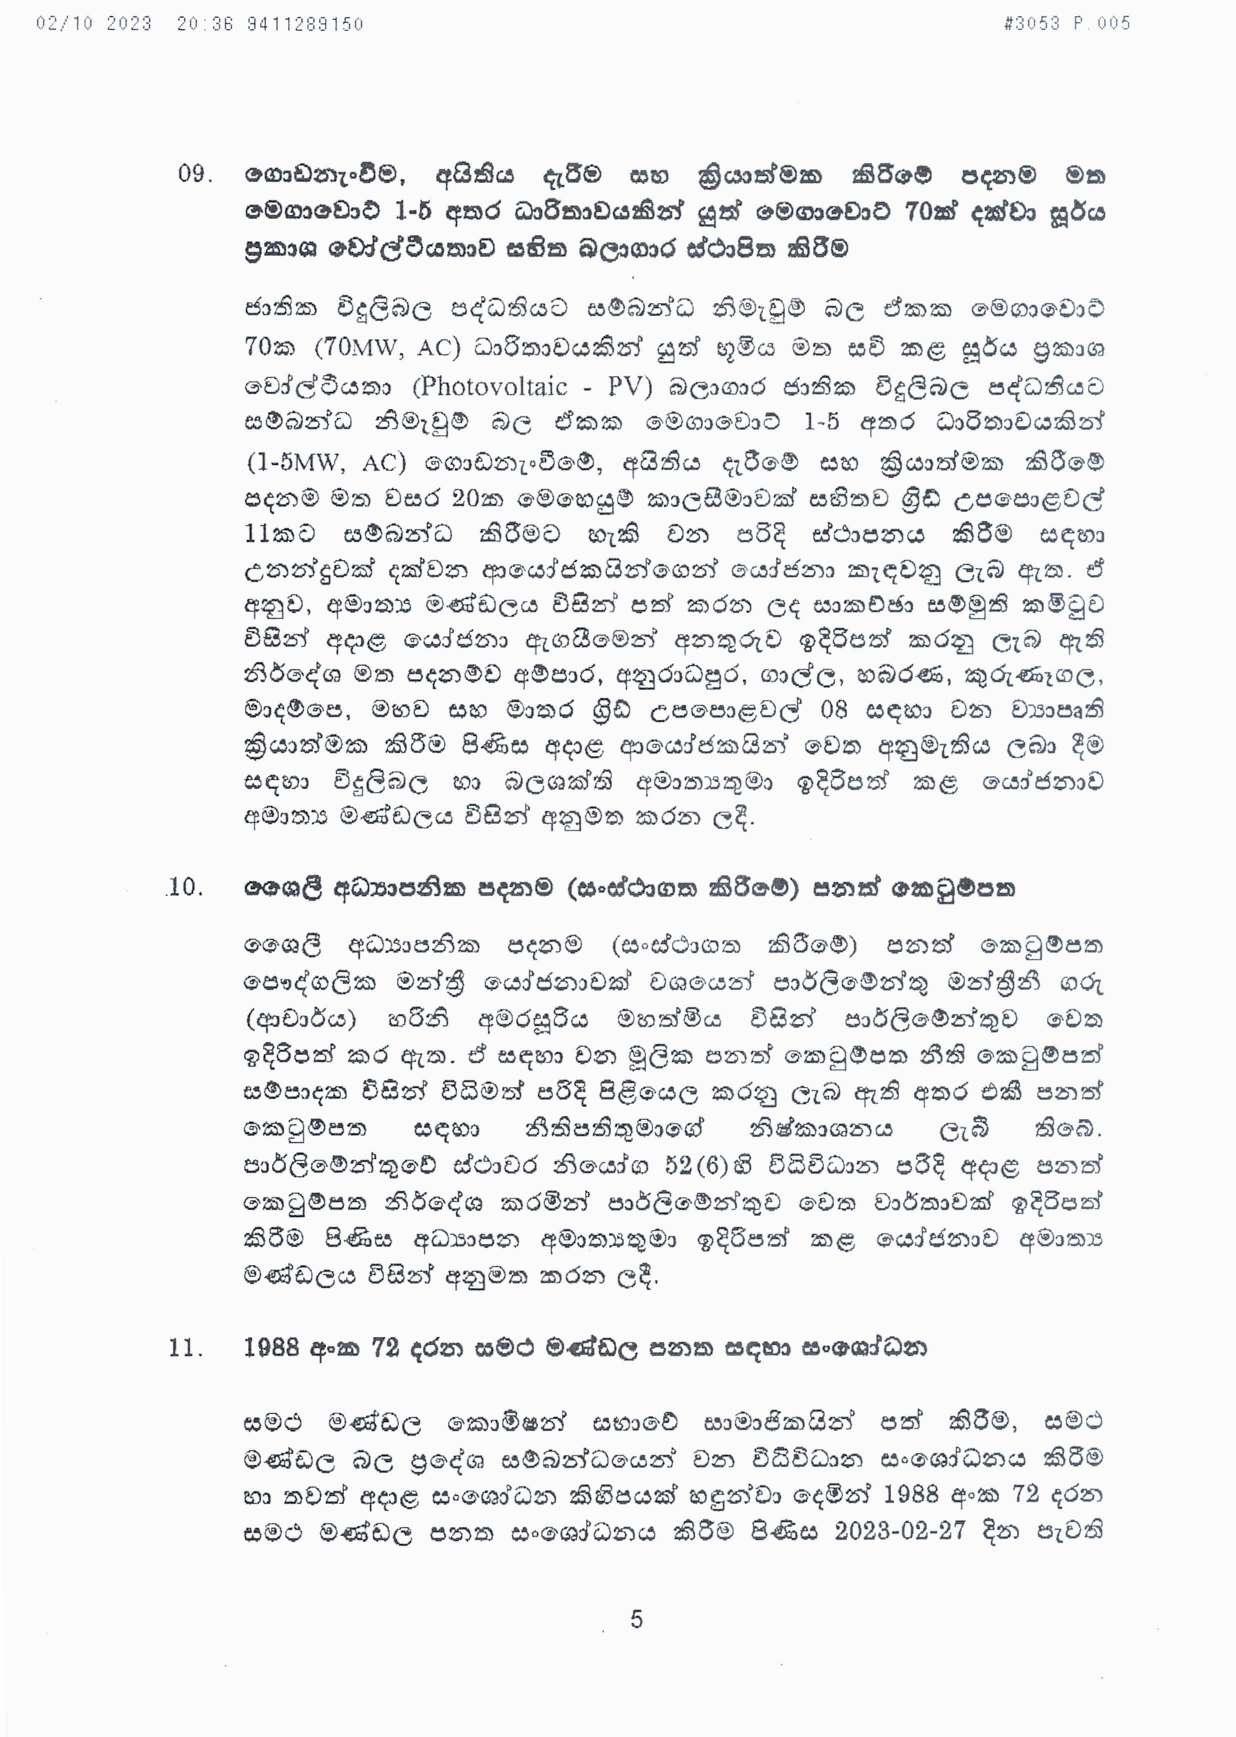 Cabinet Decision on 02.10.2023 page 005